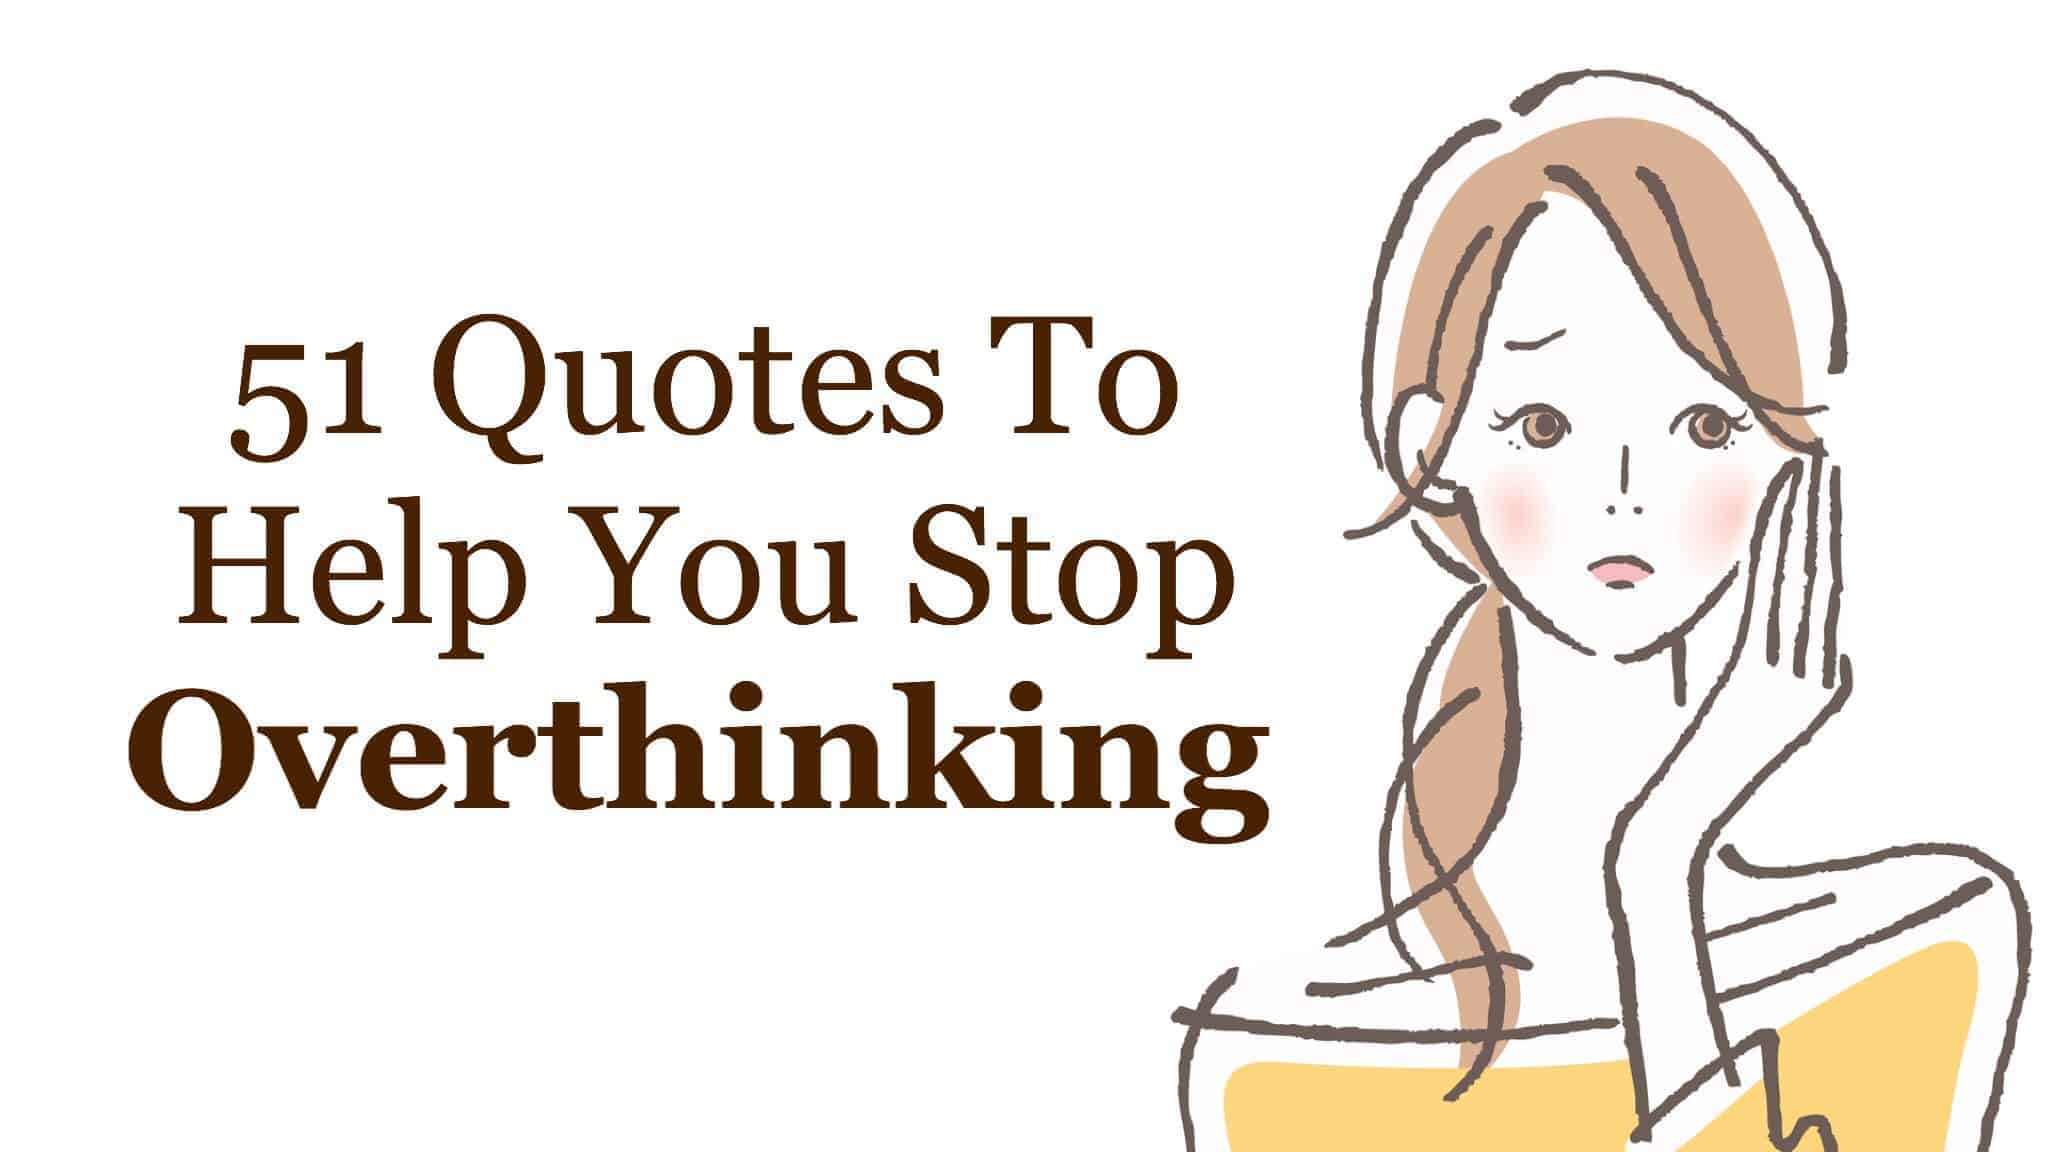 51 Quotes to Help You Stop Over Thinking